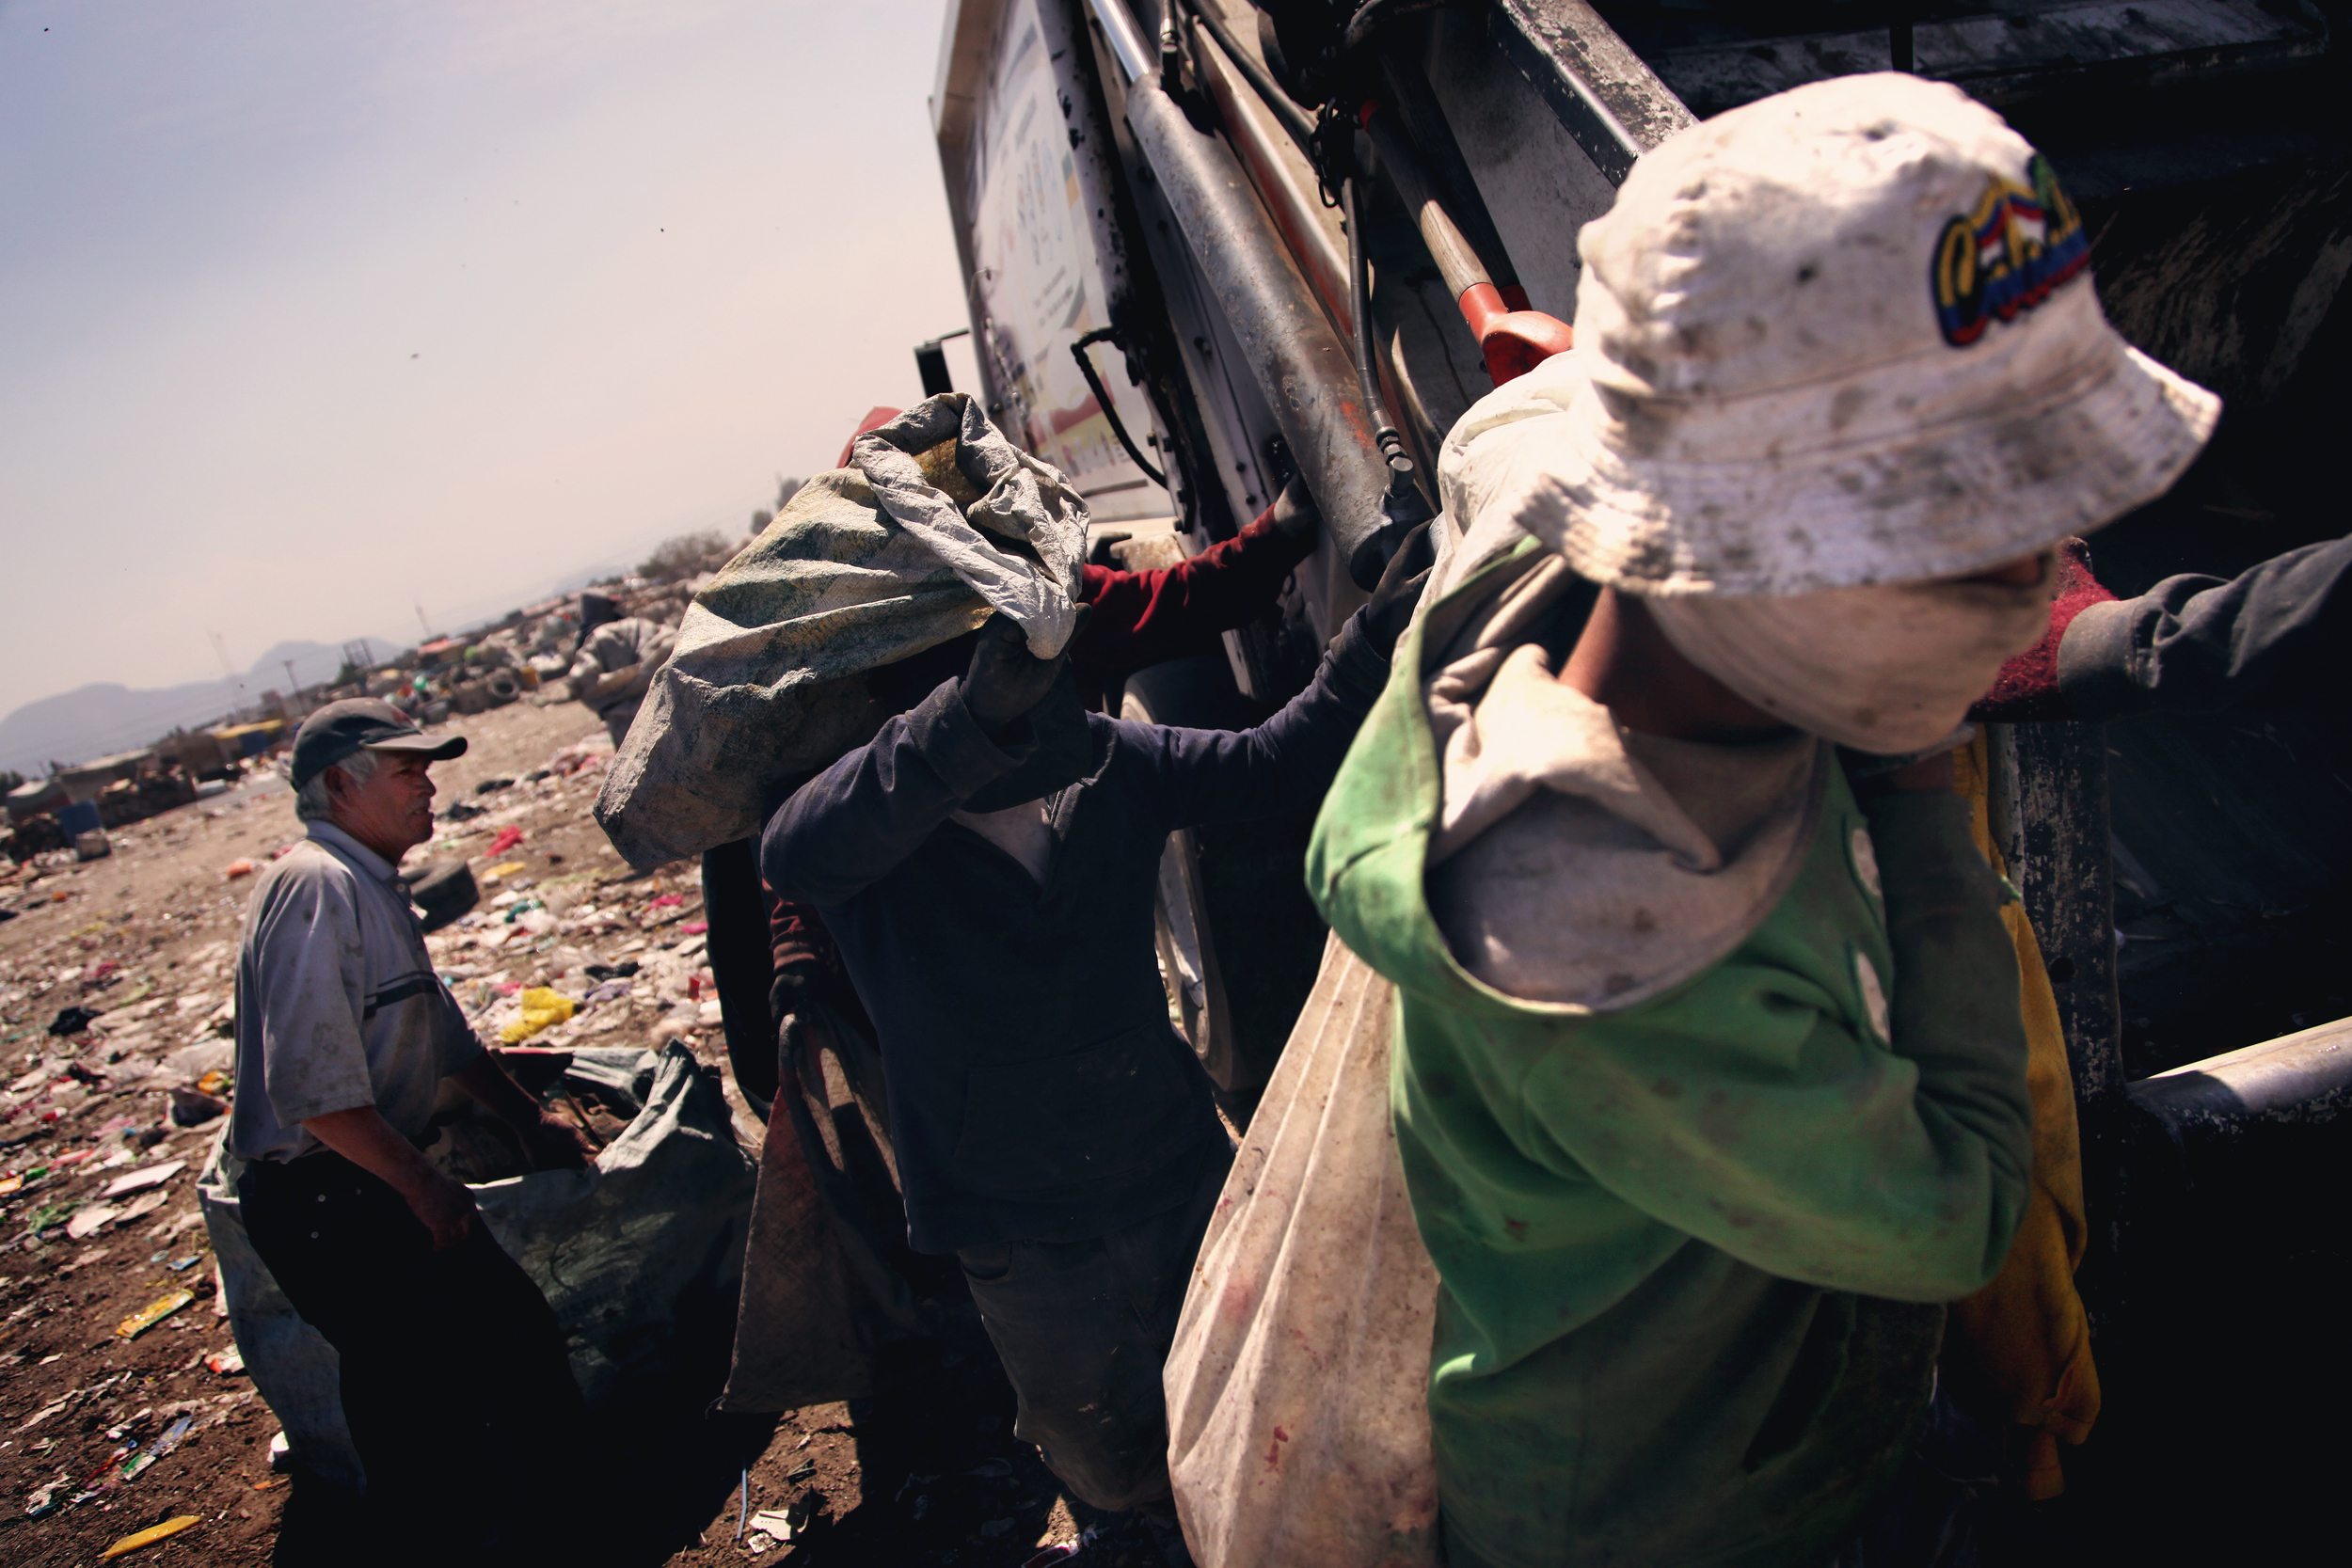   Pepenadores, or “waste pickers”, operate in the landfills on the outskirts of Mexico City, where they often live with their families.  